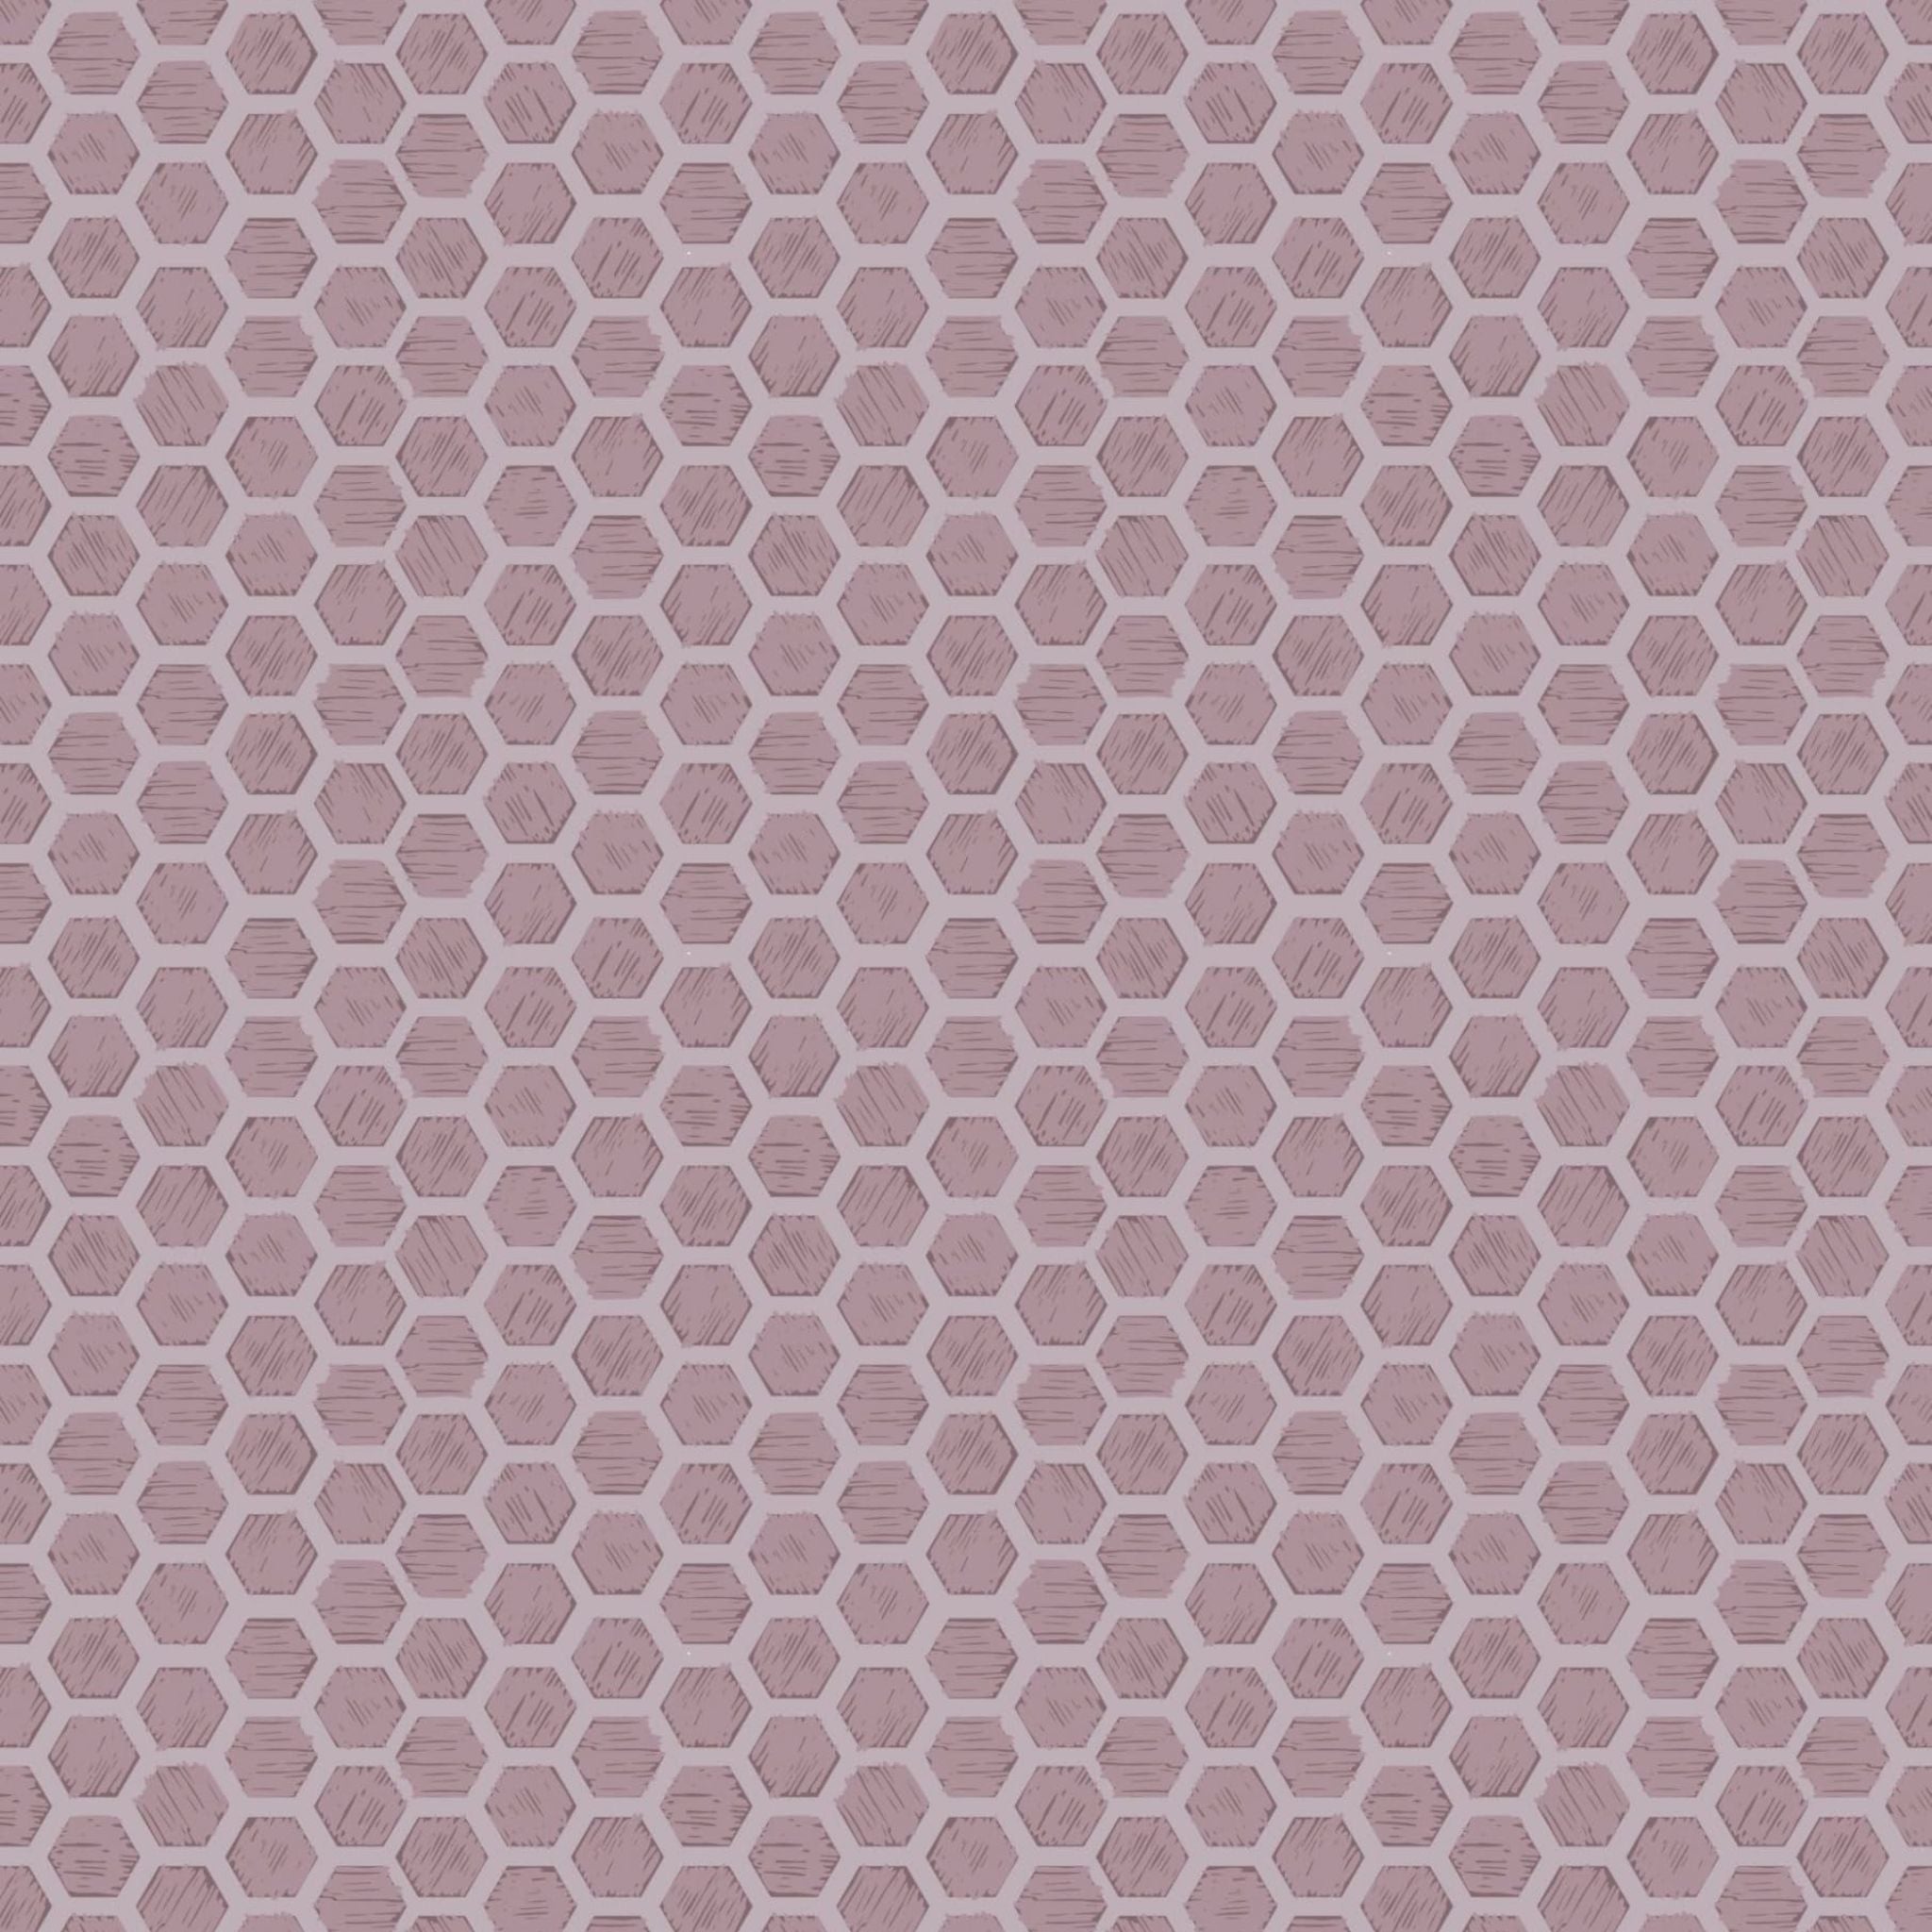 Lilac honeycomb cotton fabric - Queen Bee by Lewis and Irene